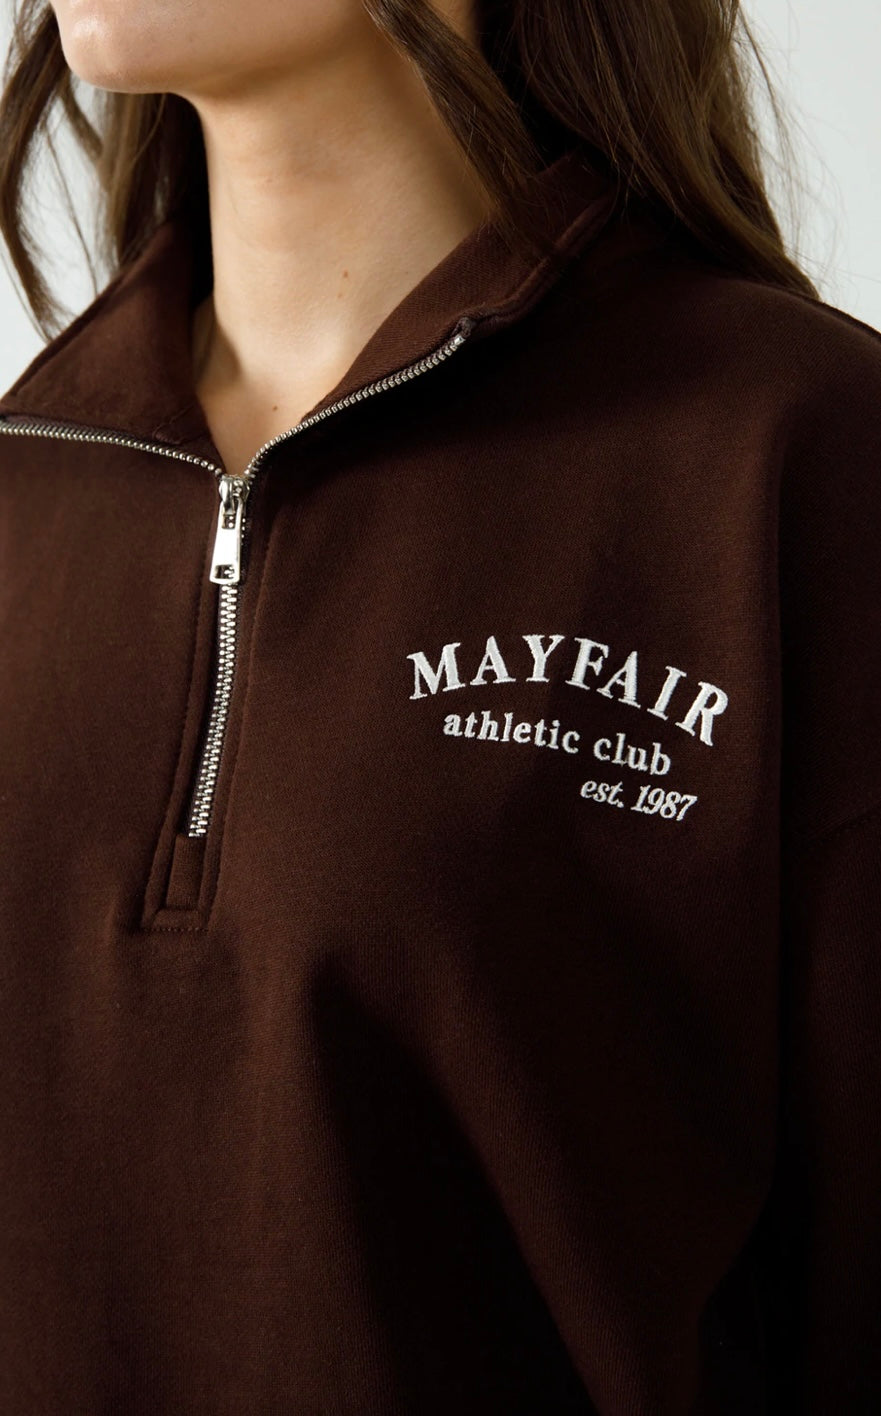 The Mayfair Group “Athletic Club” Quarter Zip